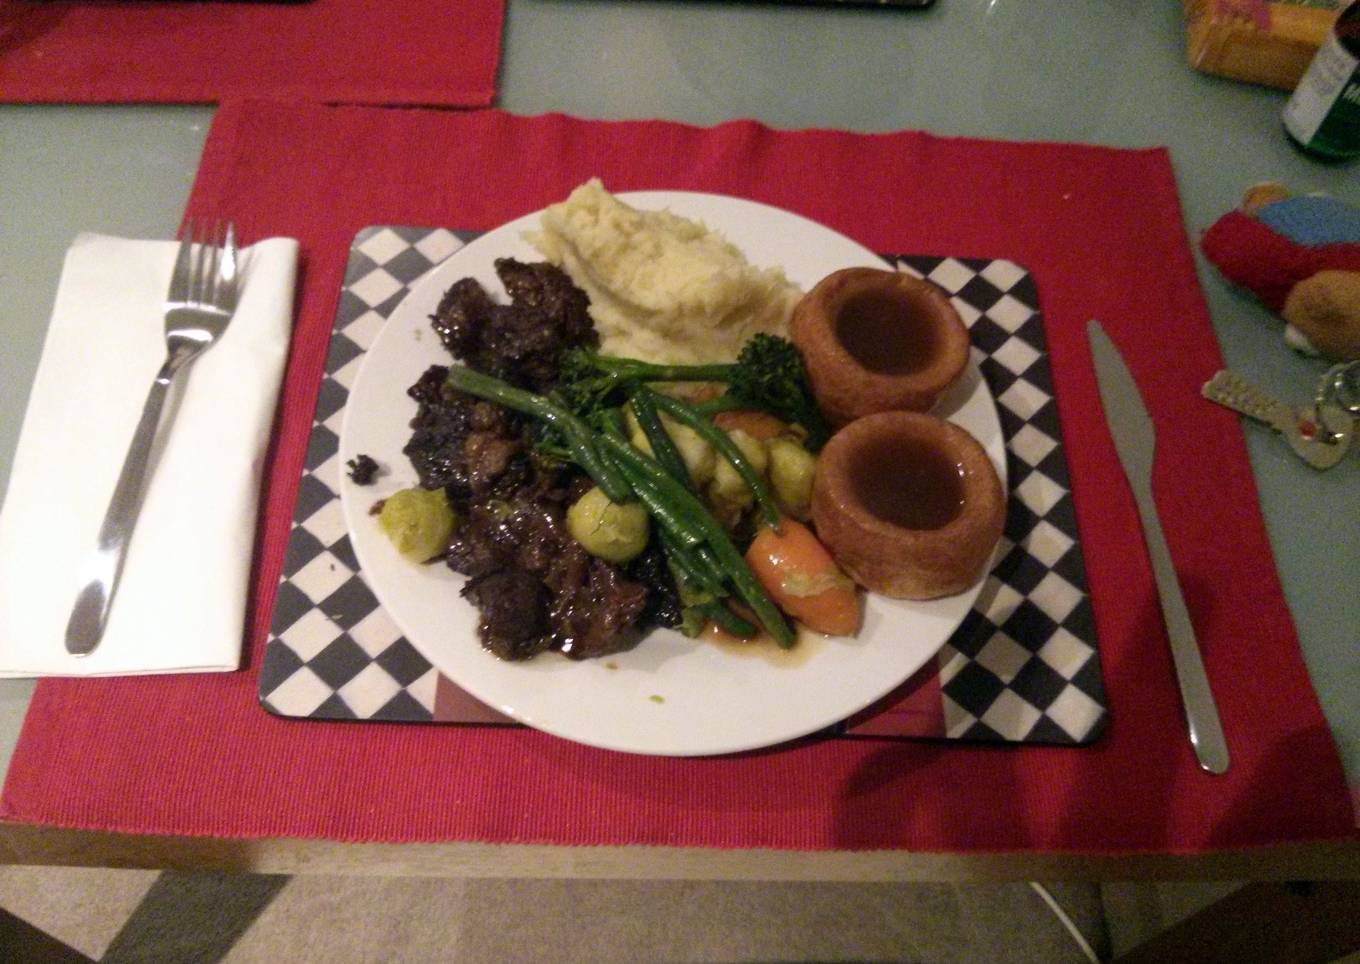 Beef in Guinness with celeriac purée,Yorkshire pudding and veggies